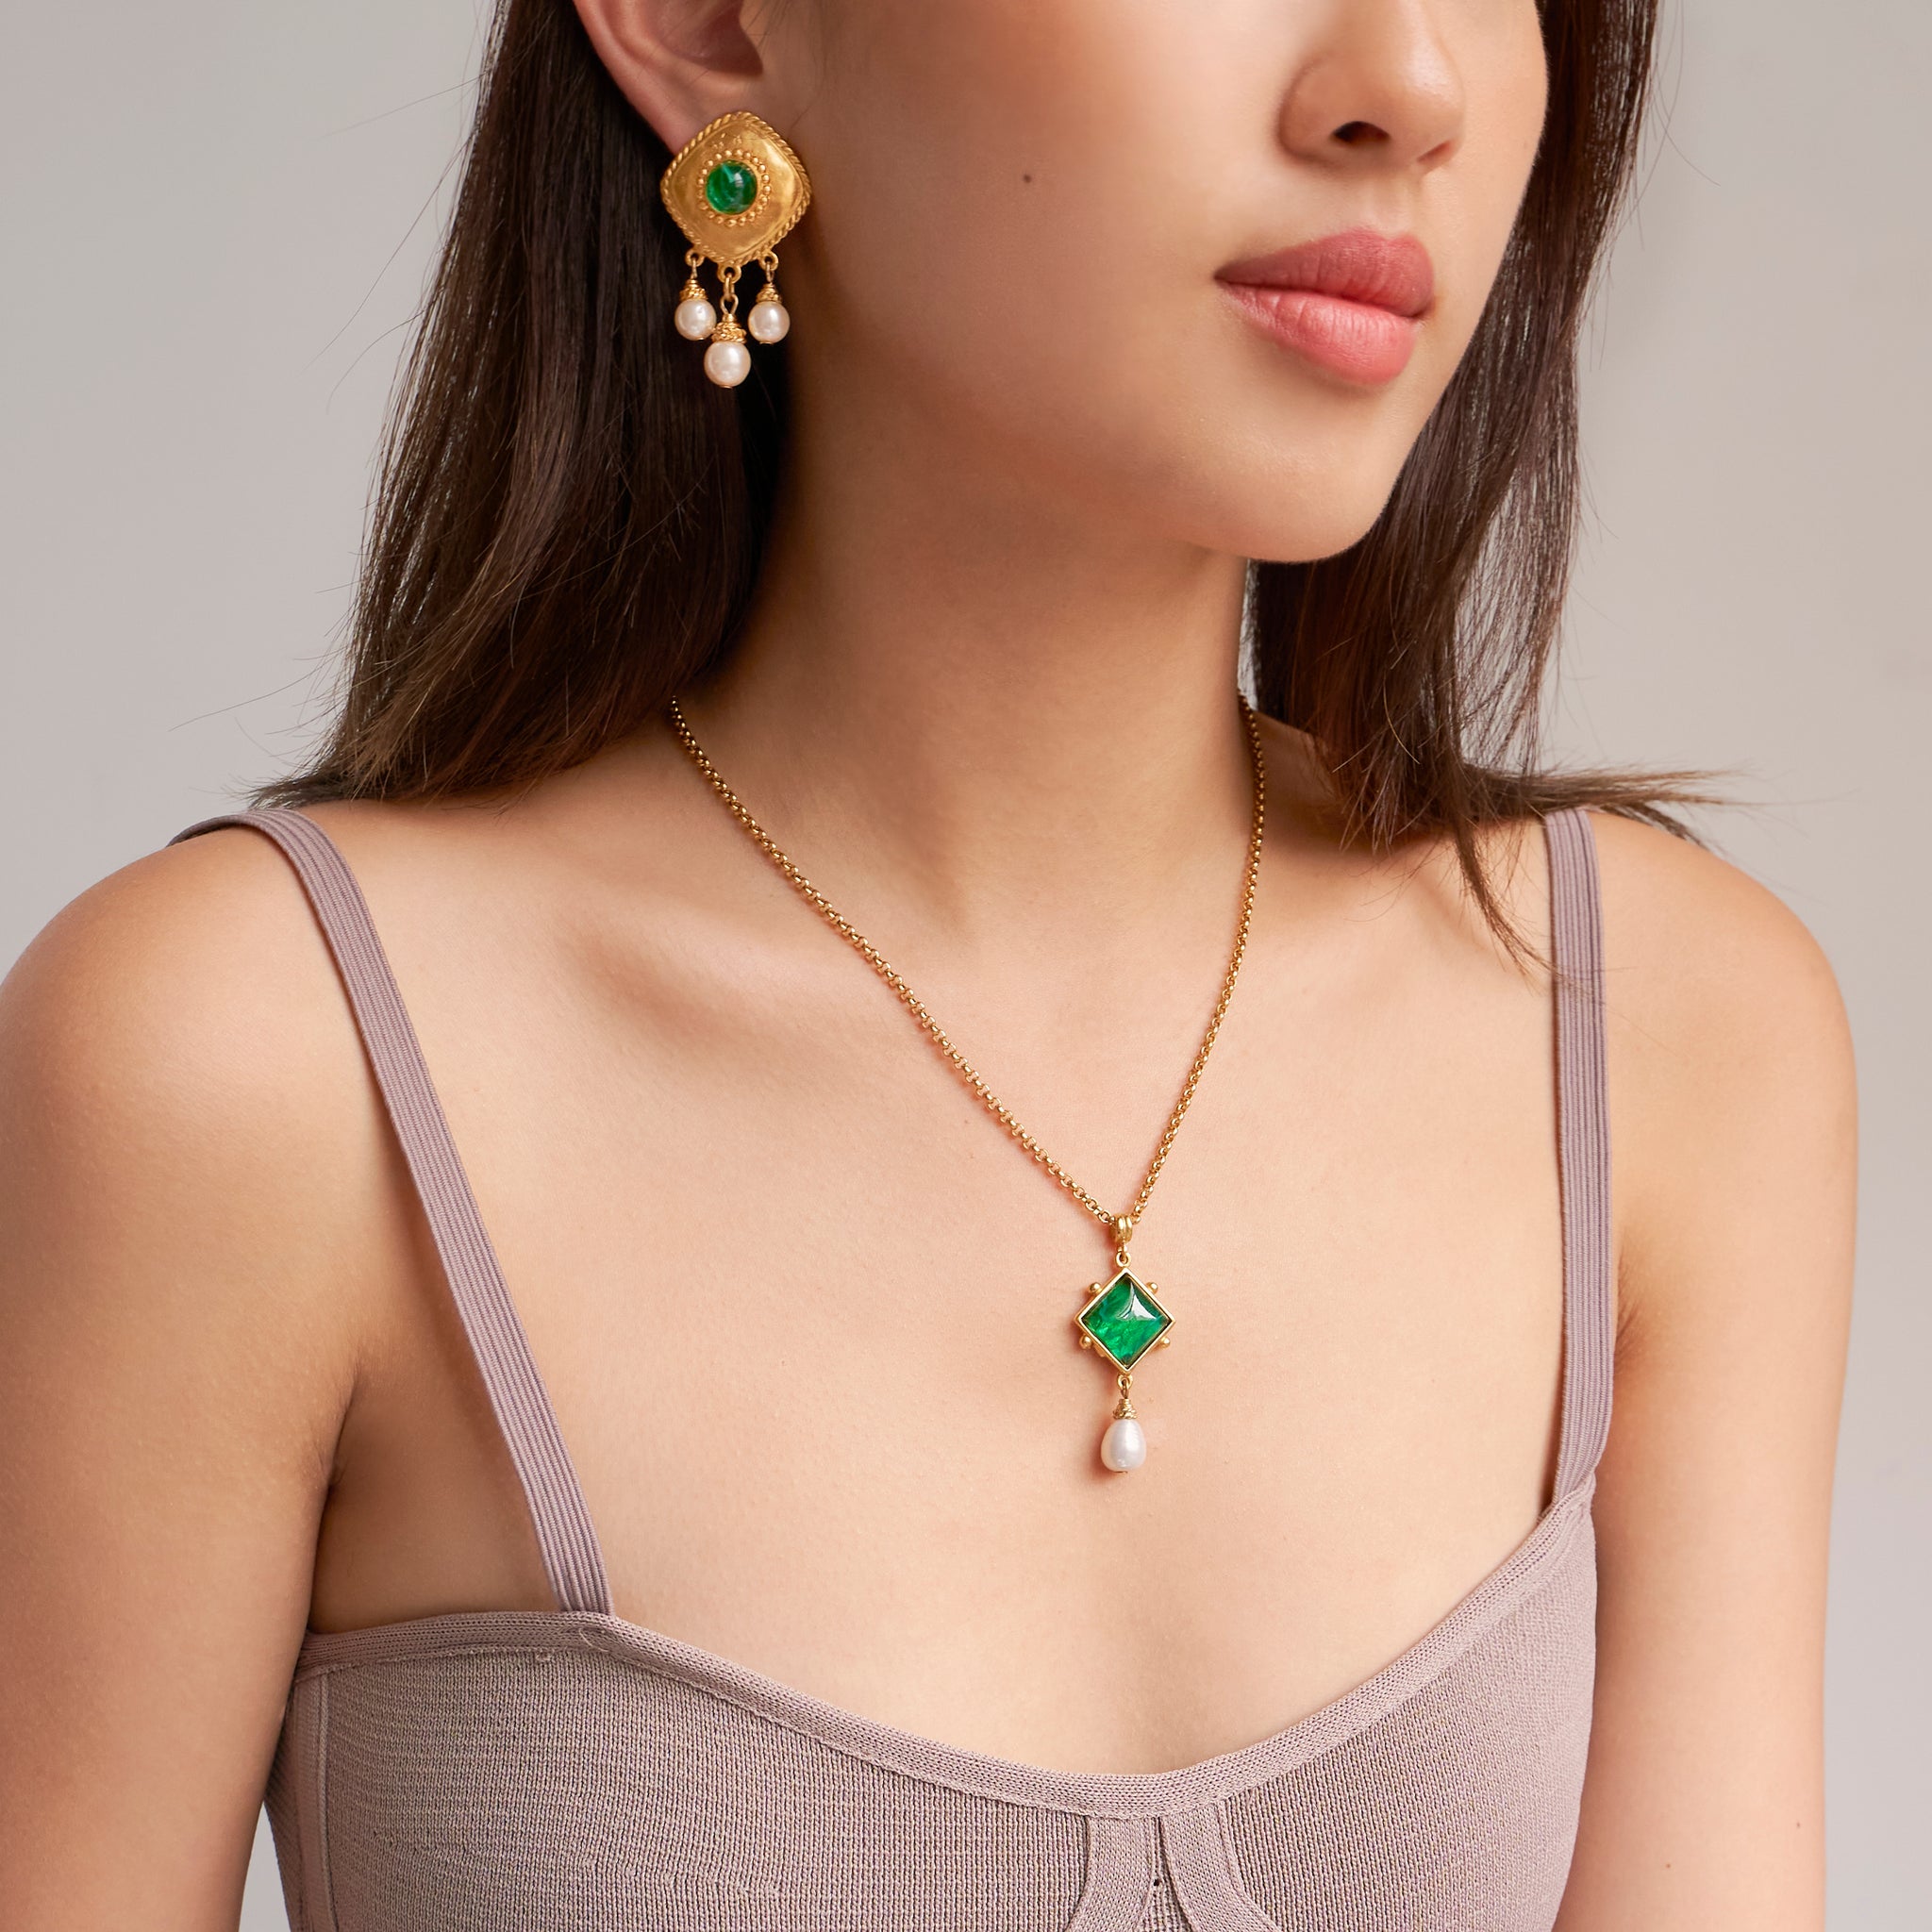 Green Necklace - Buy Green Necklace Online in India